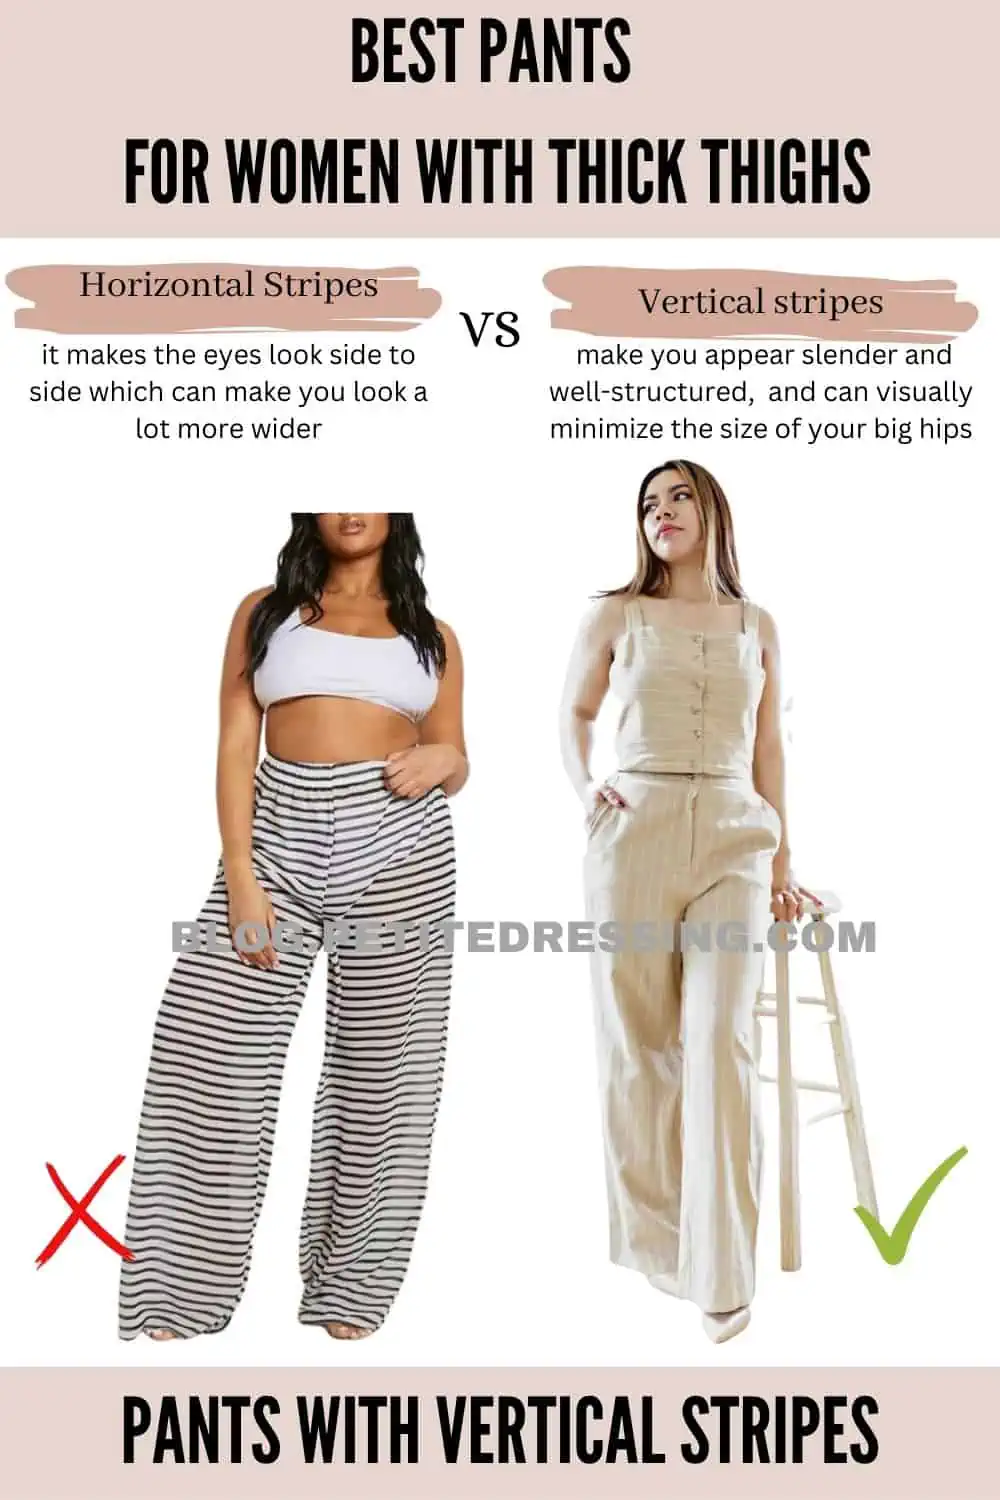 6 Flawless Palazzo Pants for Your Body Type That Every Woman Should Know